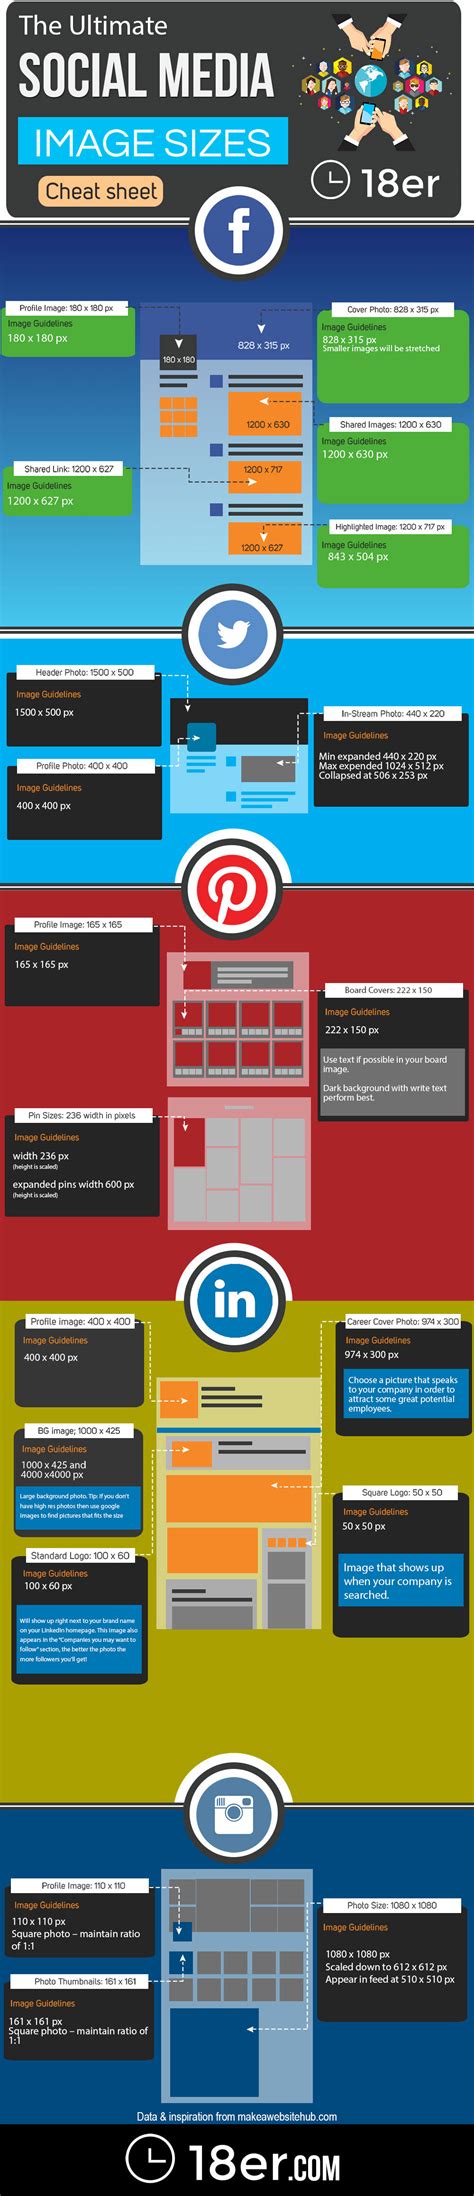 Social Media Image Sizes Cheat Sheet For Infographic Images